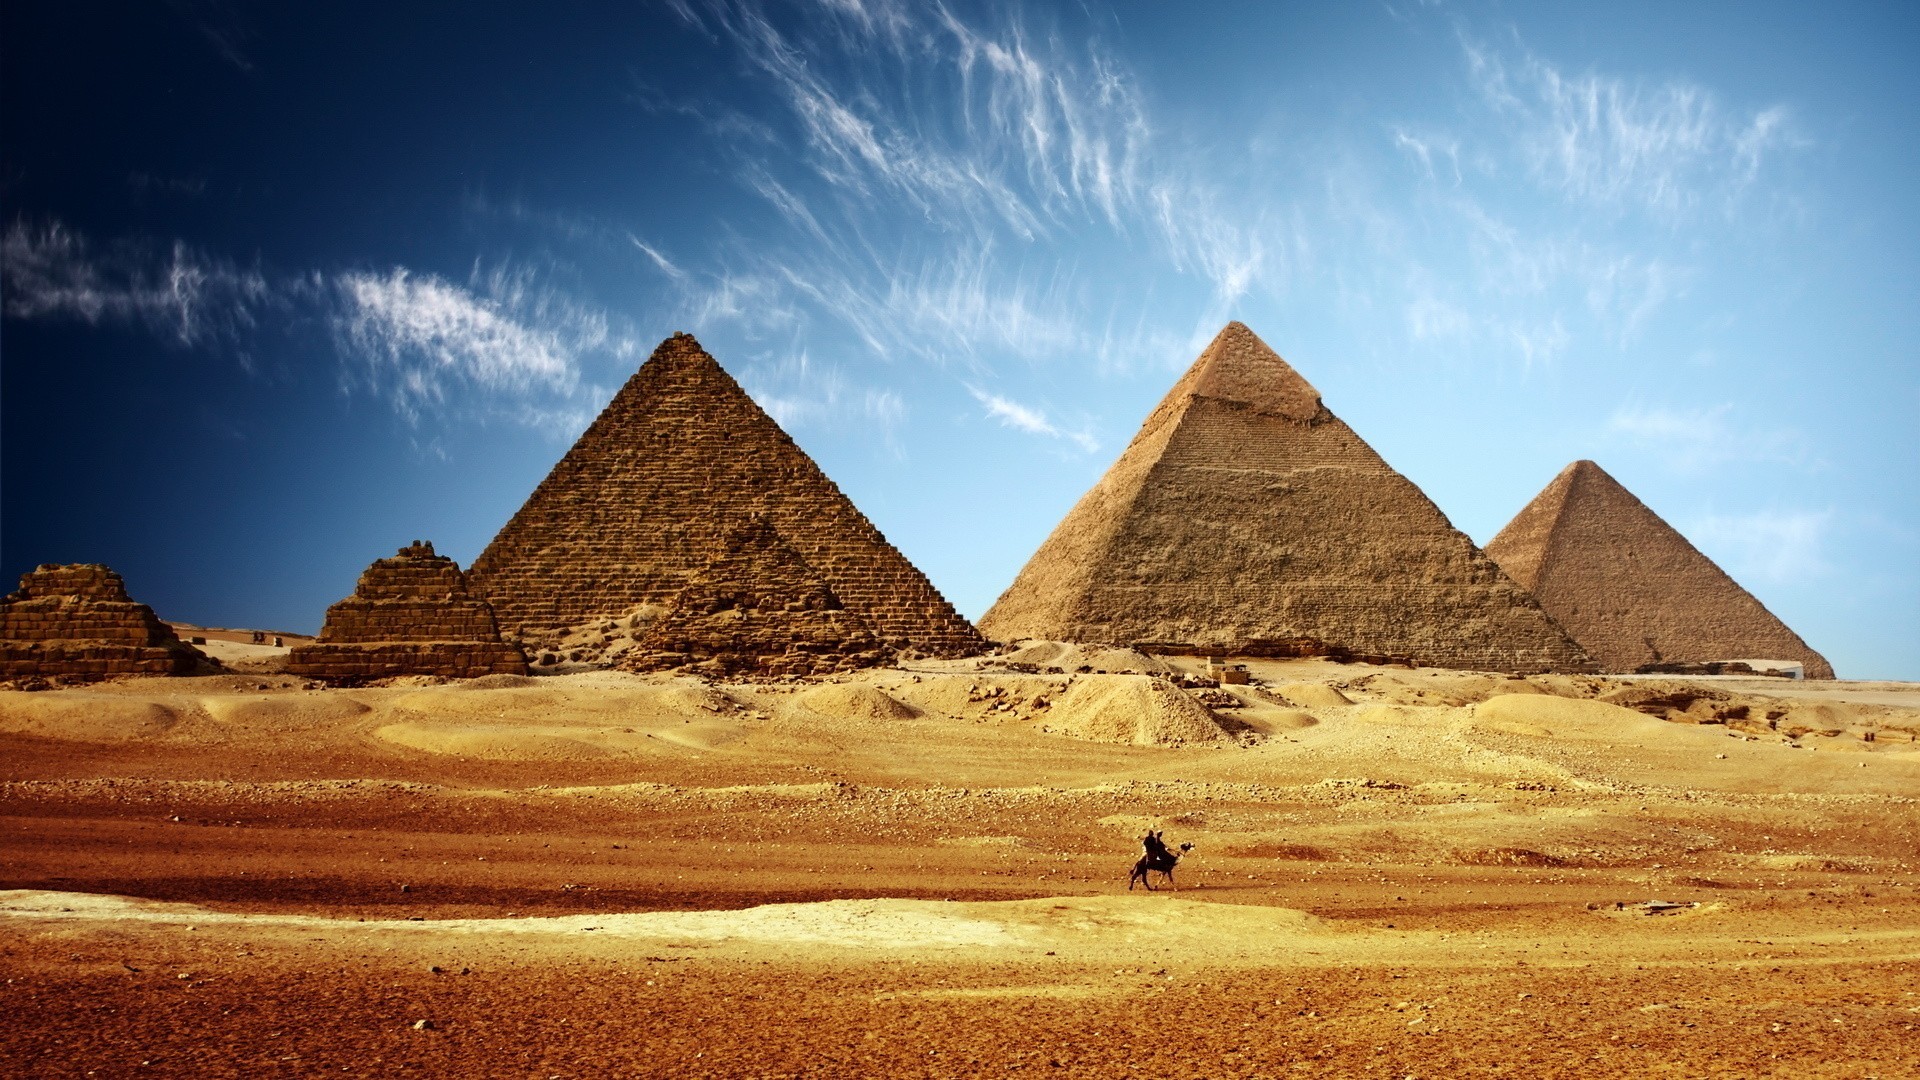 1920x1080 Daily Wallpaper: Pyramids of Egypt | I Like To Waste My Time